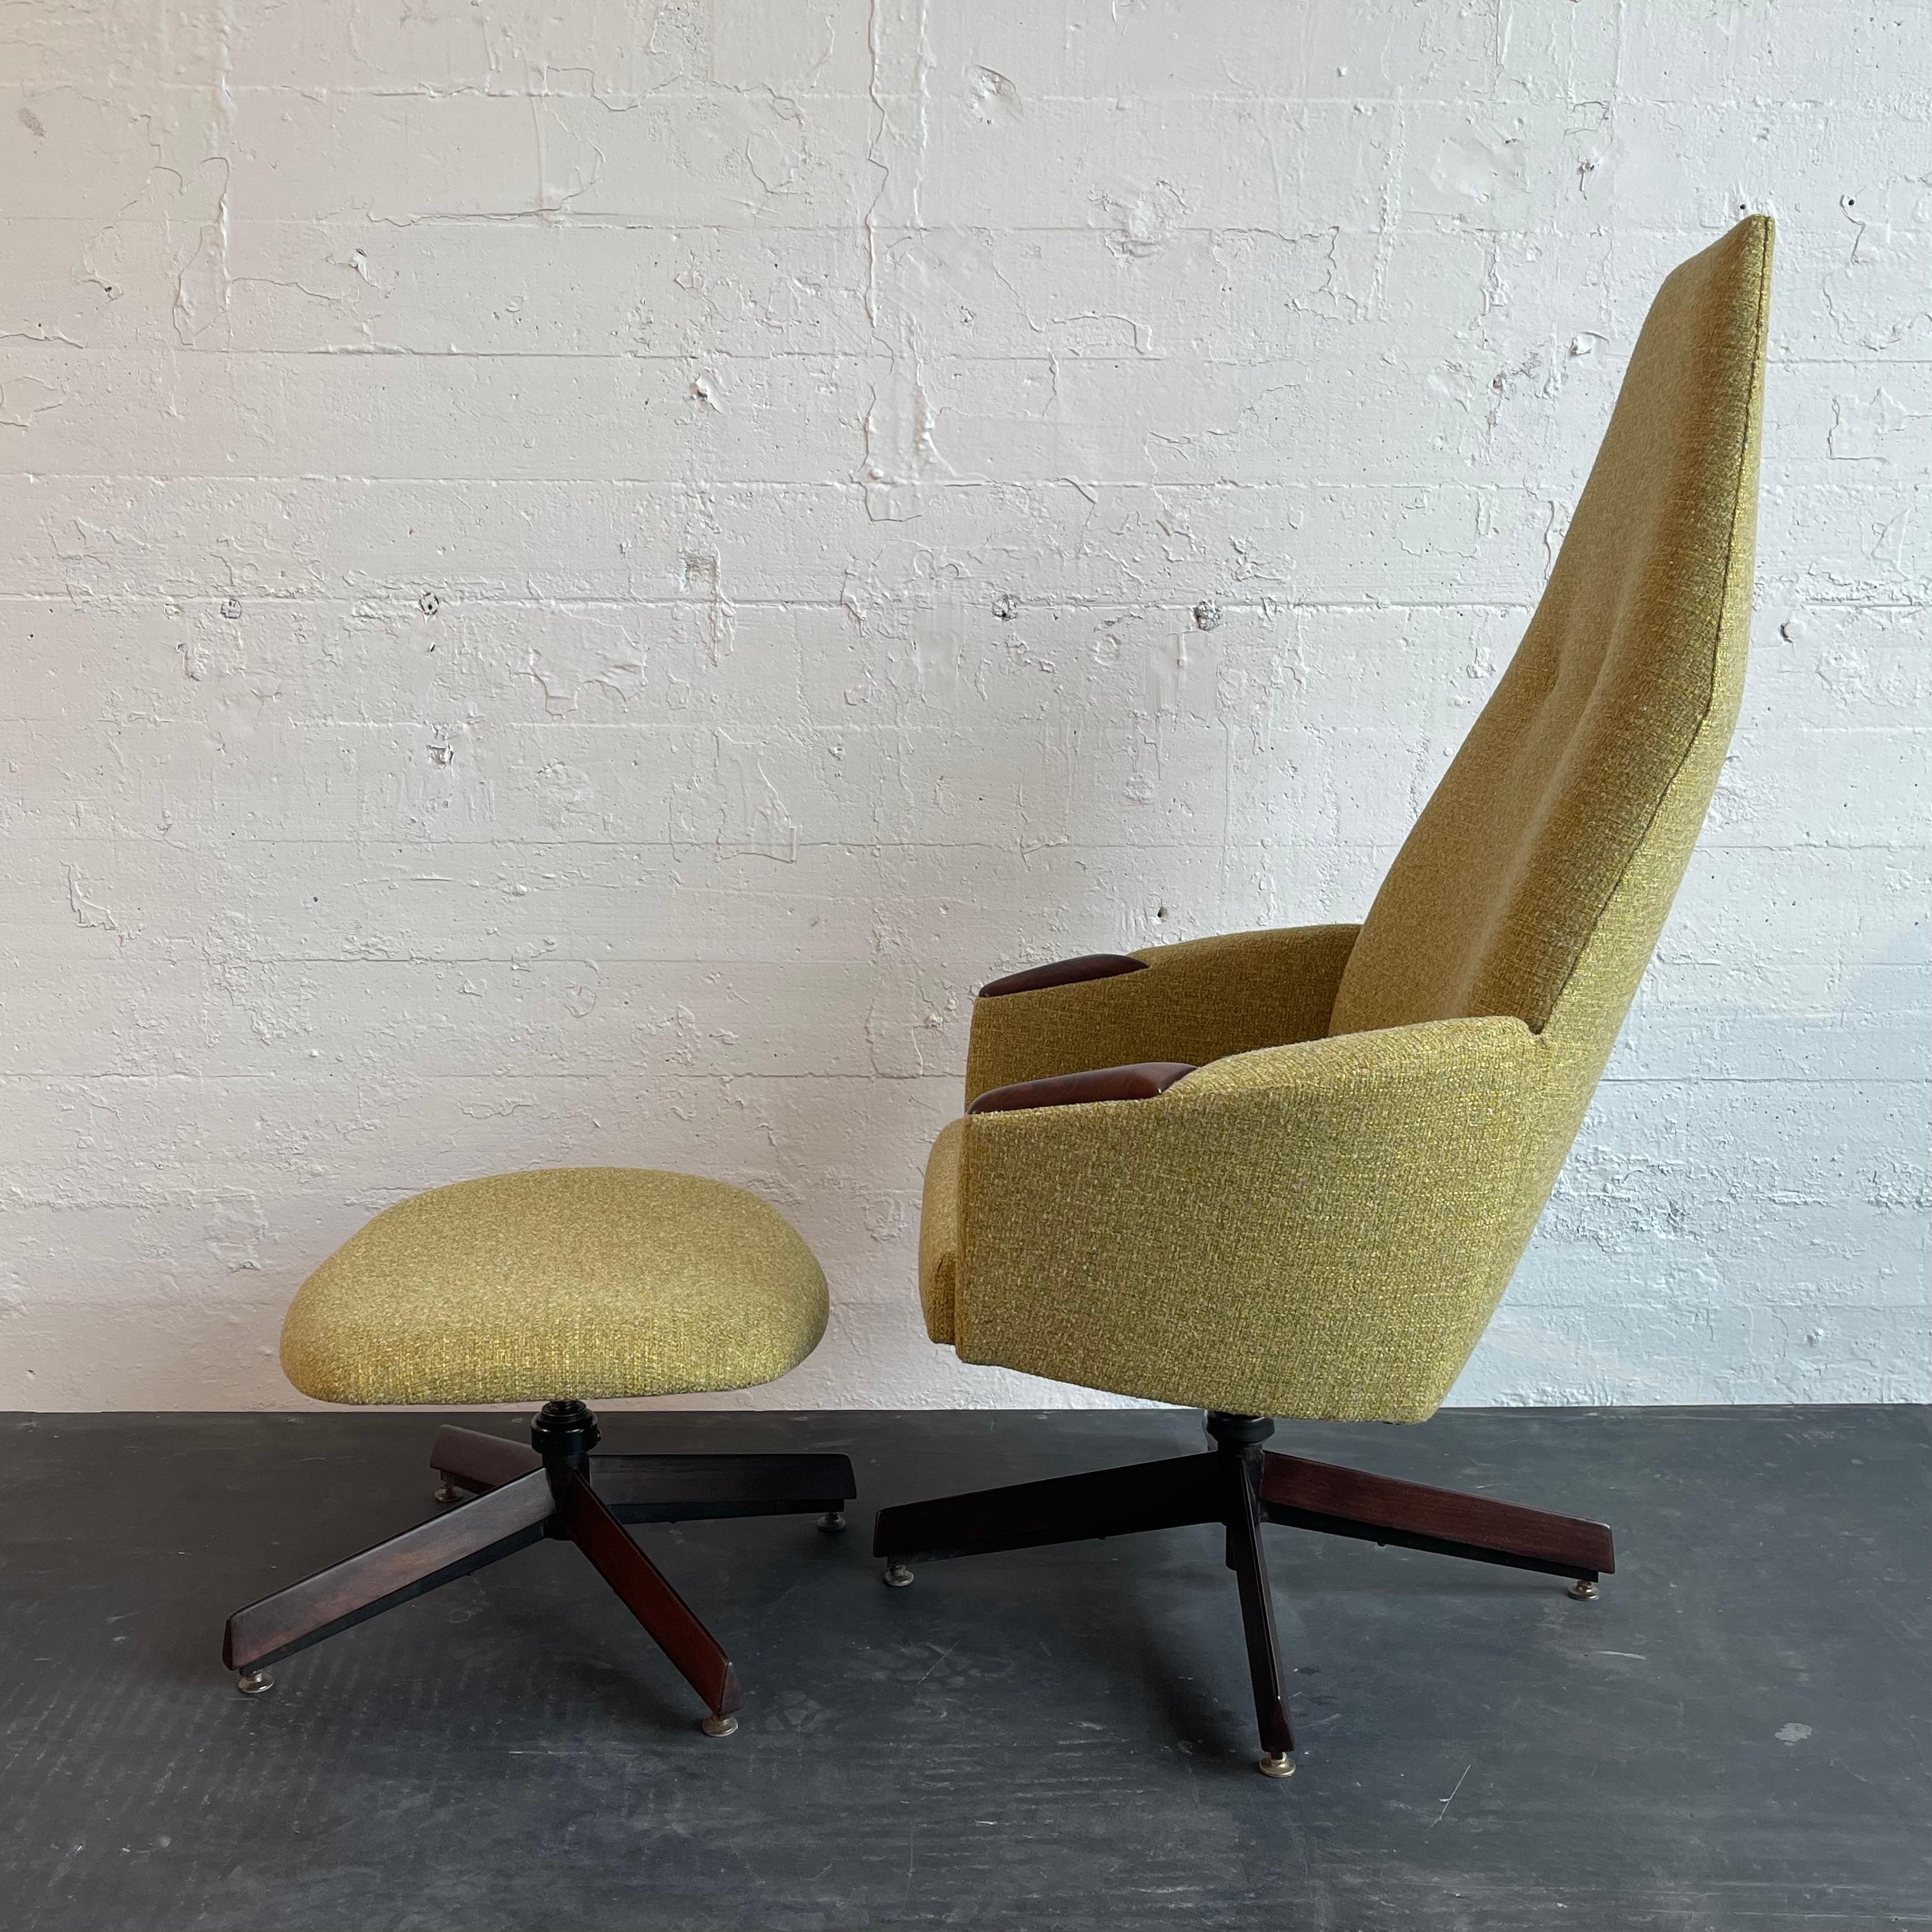 20th Century Mid-Century Modern Lounge Chair Ottoman Set By Adrian Pearsall, Craft Associates For Sale